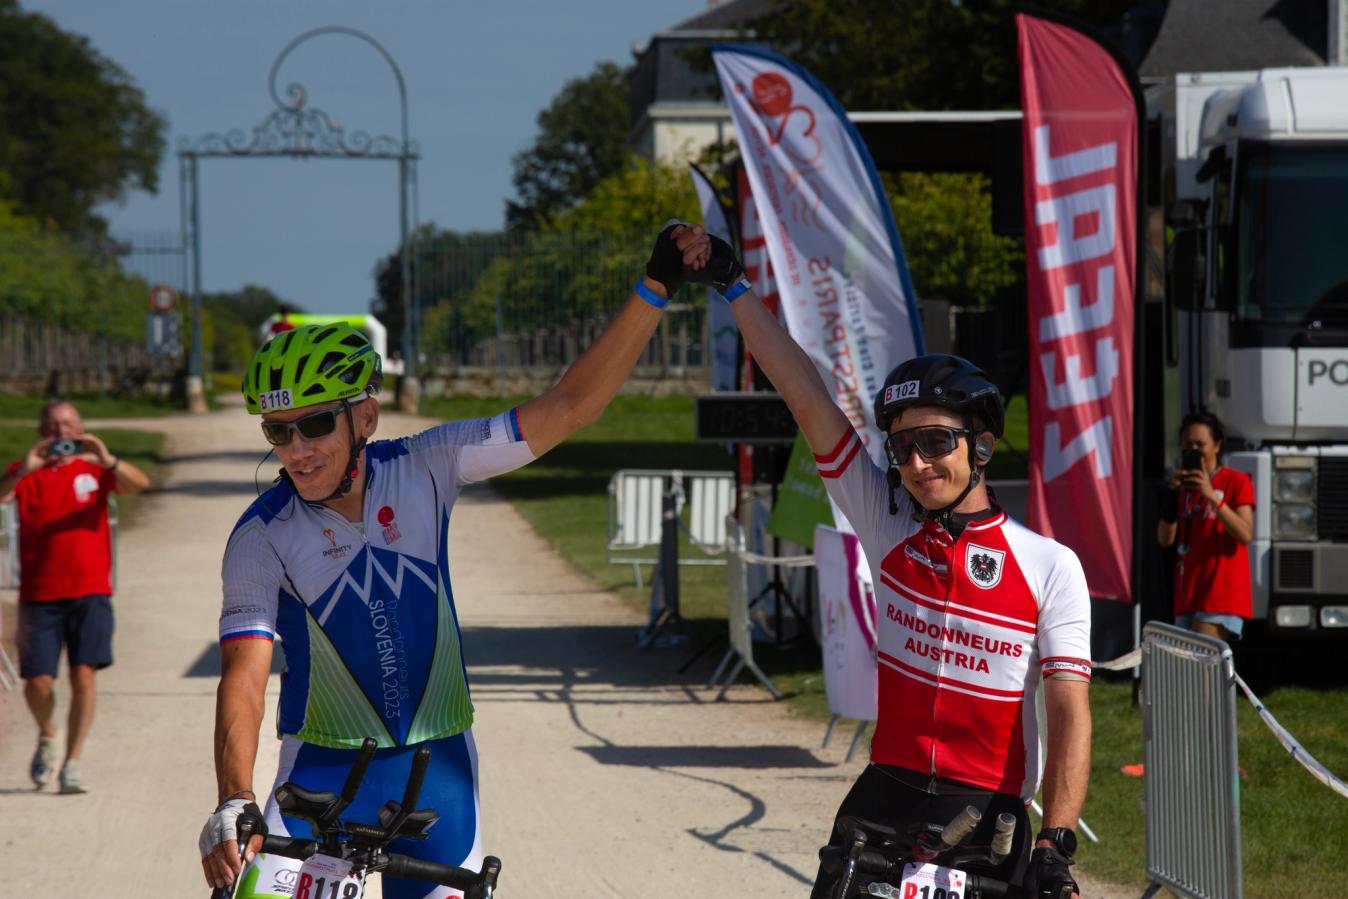 Baloh and Zotter join hands in celebration at the finish in Rambouillet